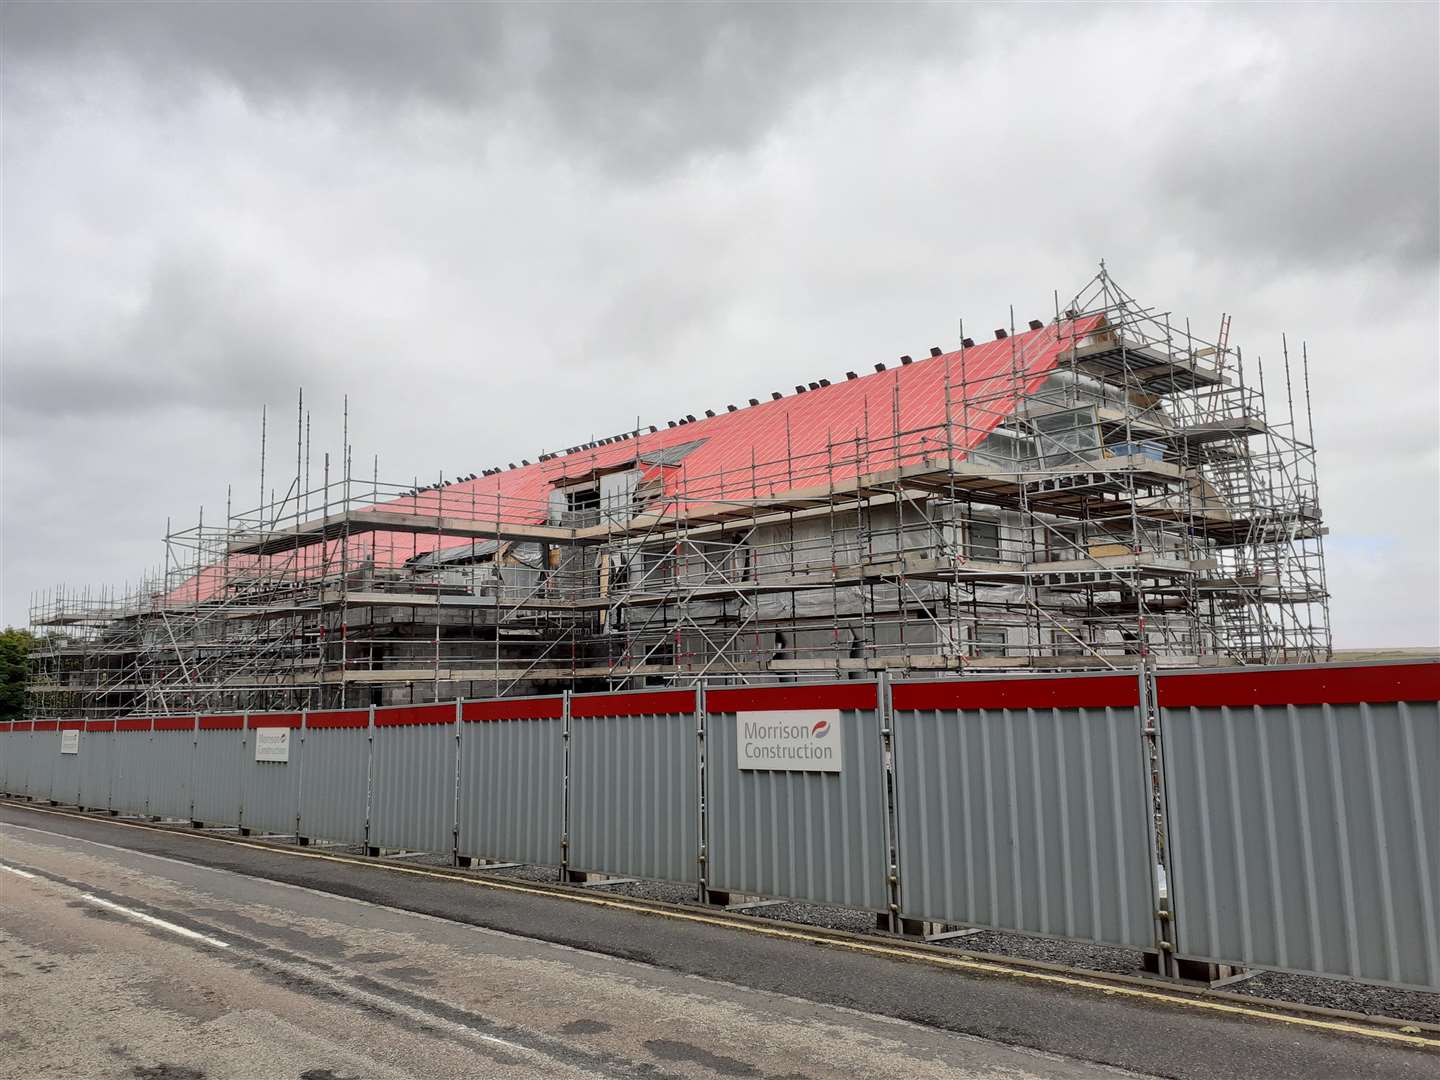 The Premier Inn construction site in Thurso pictured earlier this month.